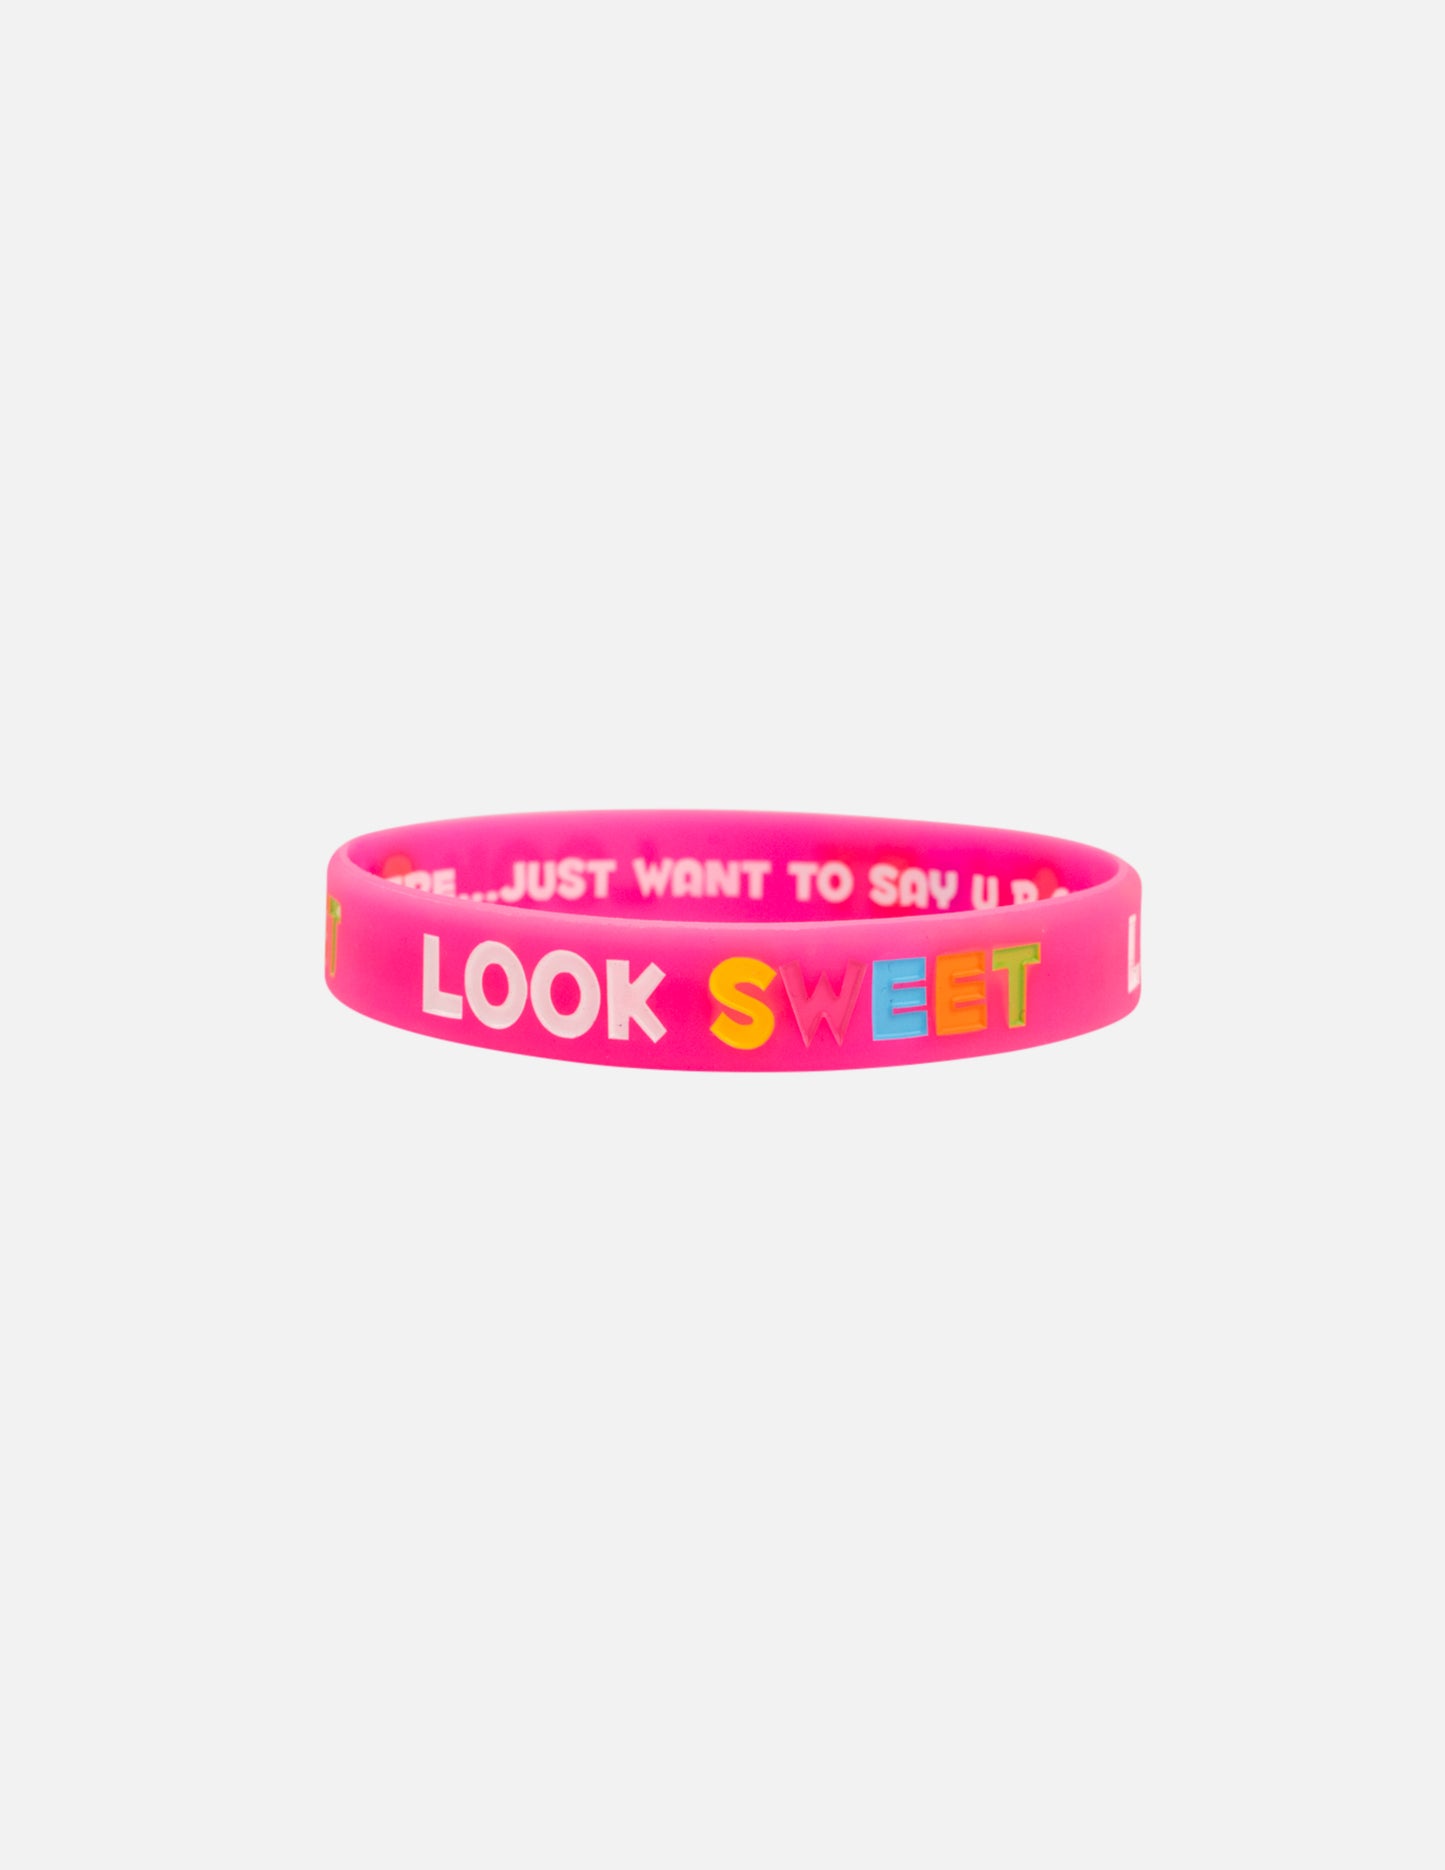 SWEETS - Wristbands